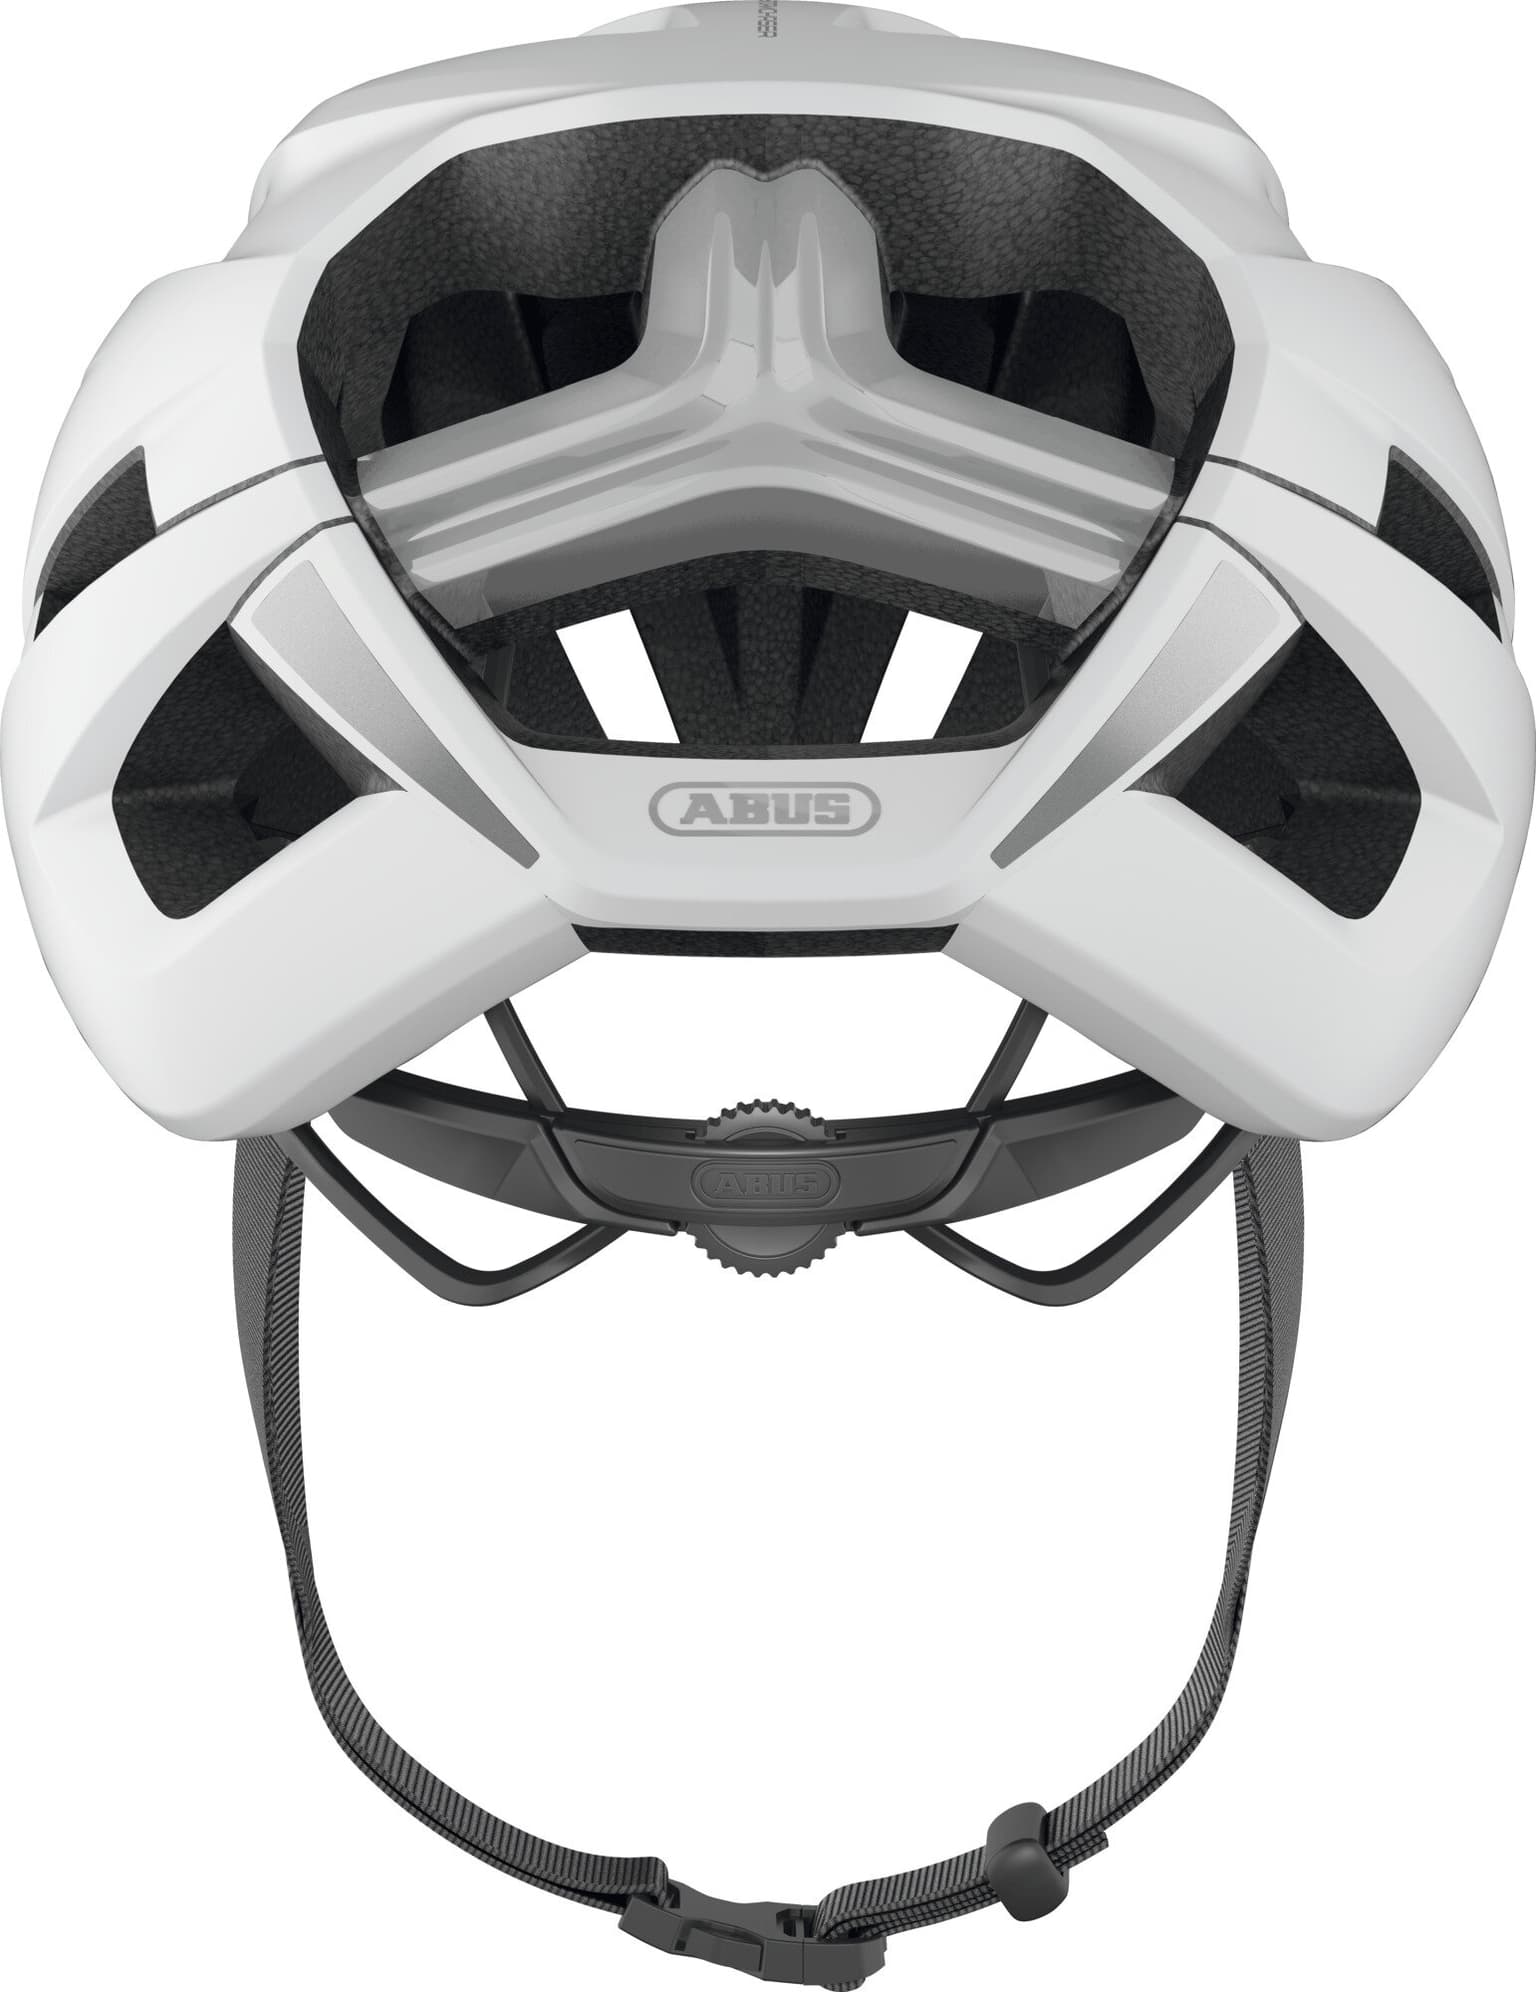 Abus Abus StormChaser ACE Velohelm weiss 5